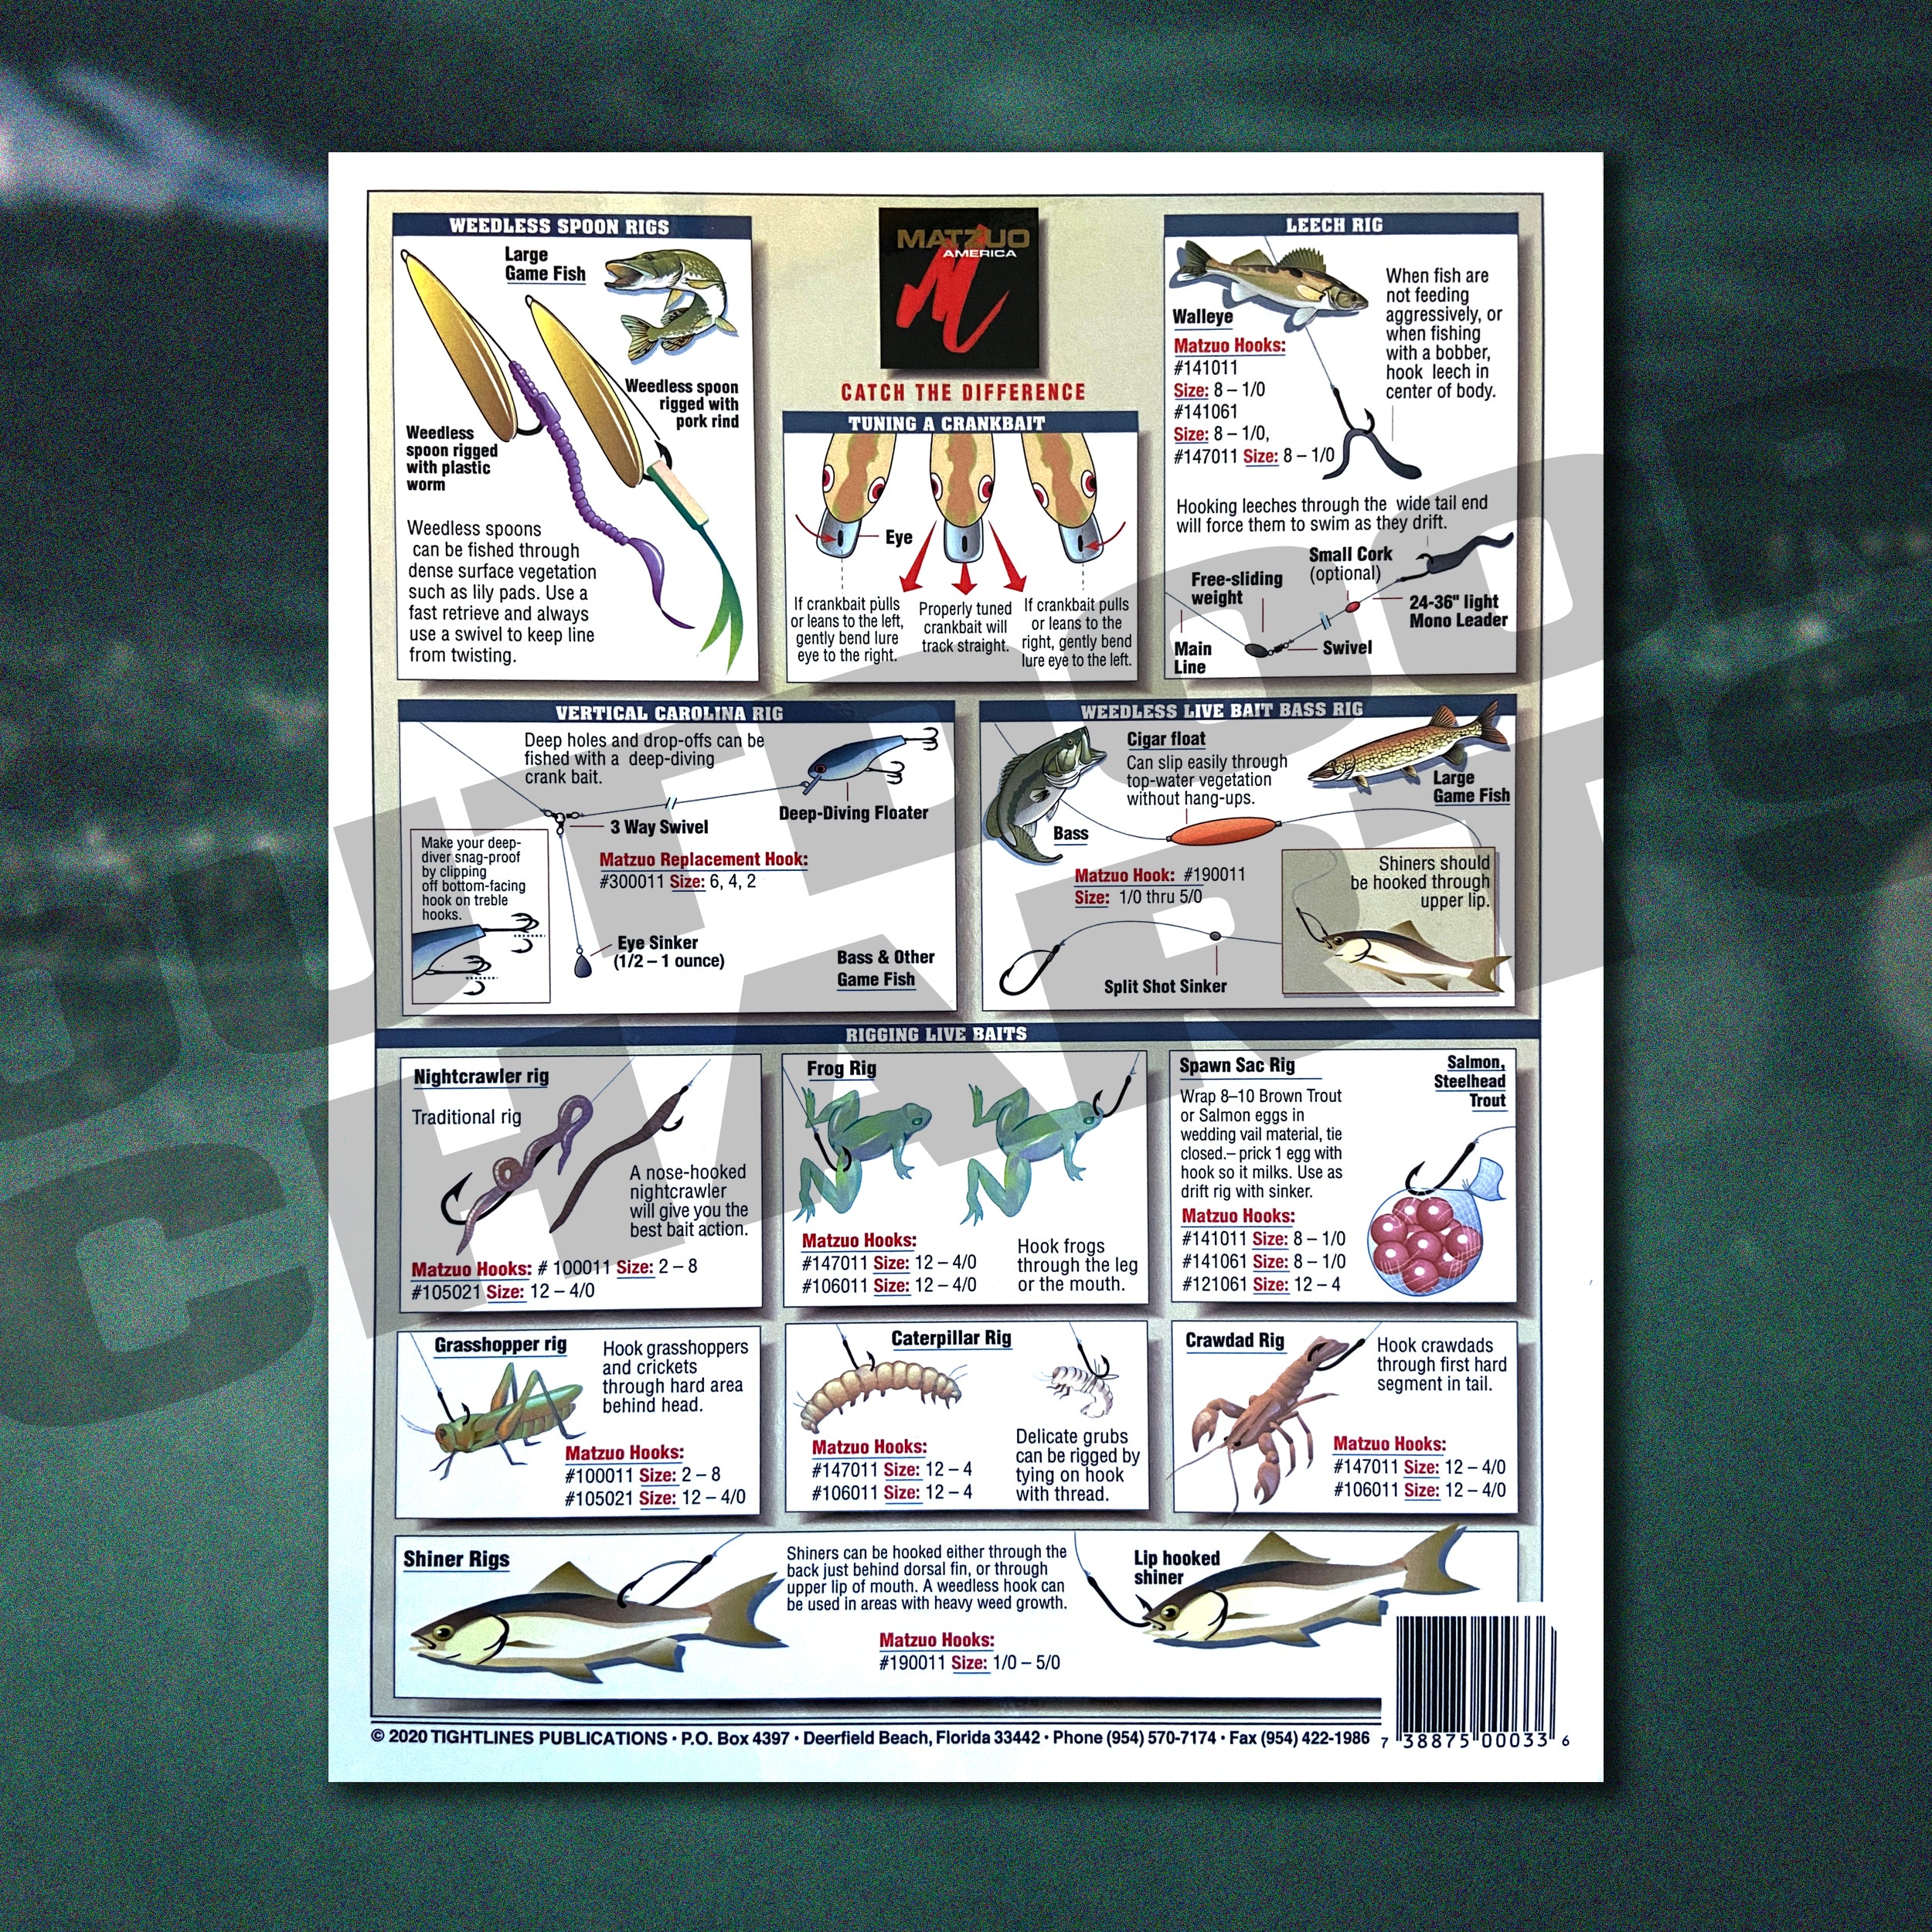 Bait Rigging Freshwater Fish Chart #1 (Live Bait Rigs, Bottom Rigs, &  Artificial Rigs)